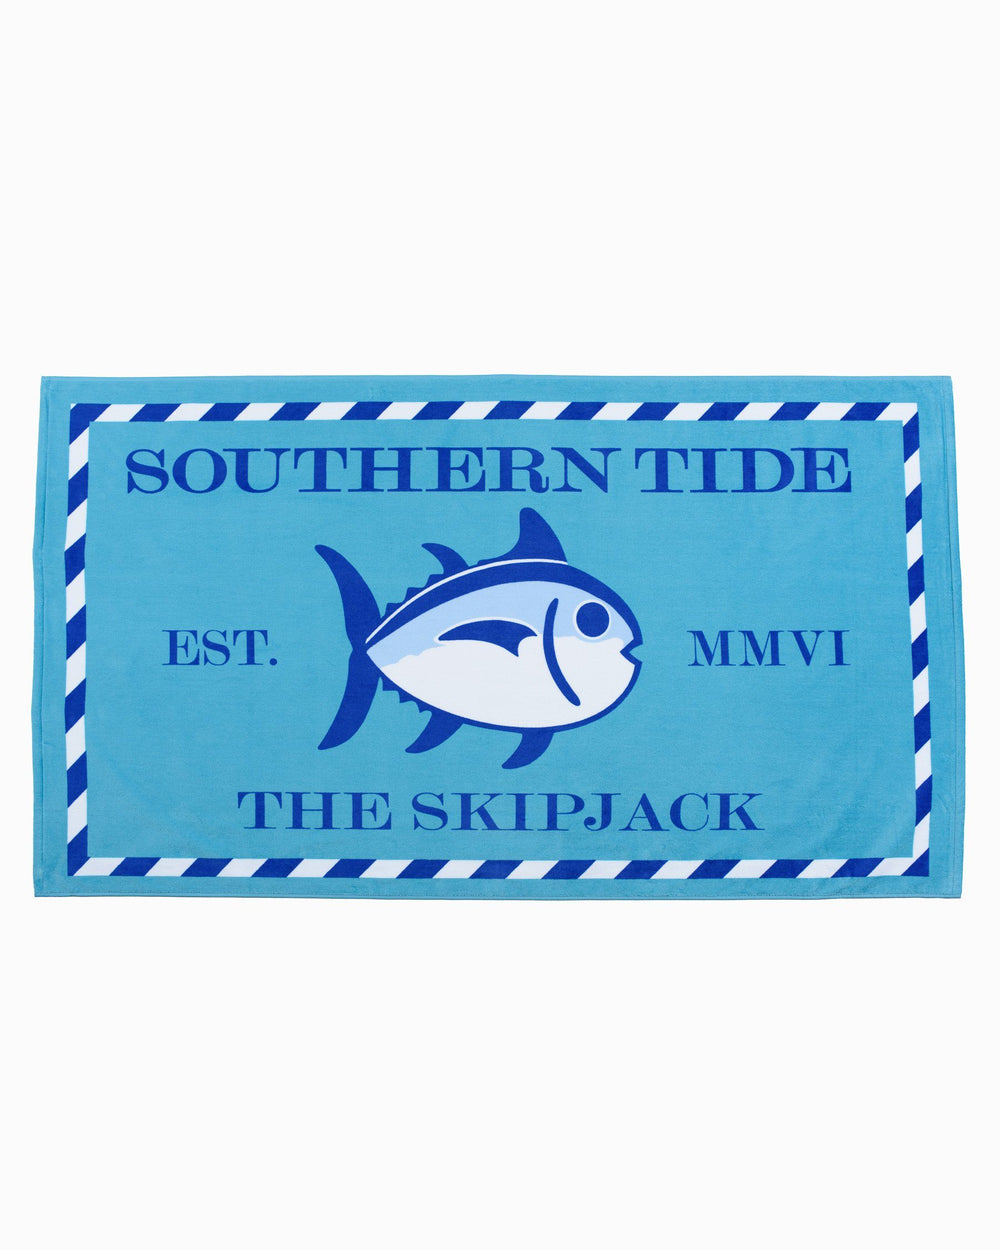 The front view of the Skipjack Beach Towel by Southern Tide - Waterfall